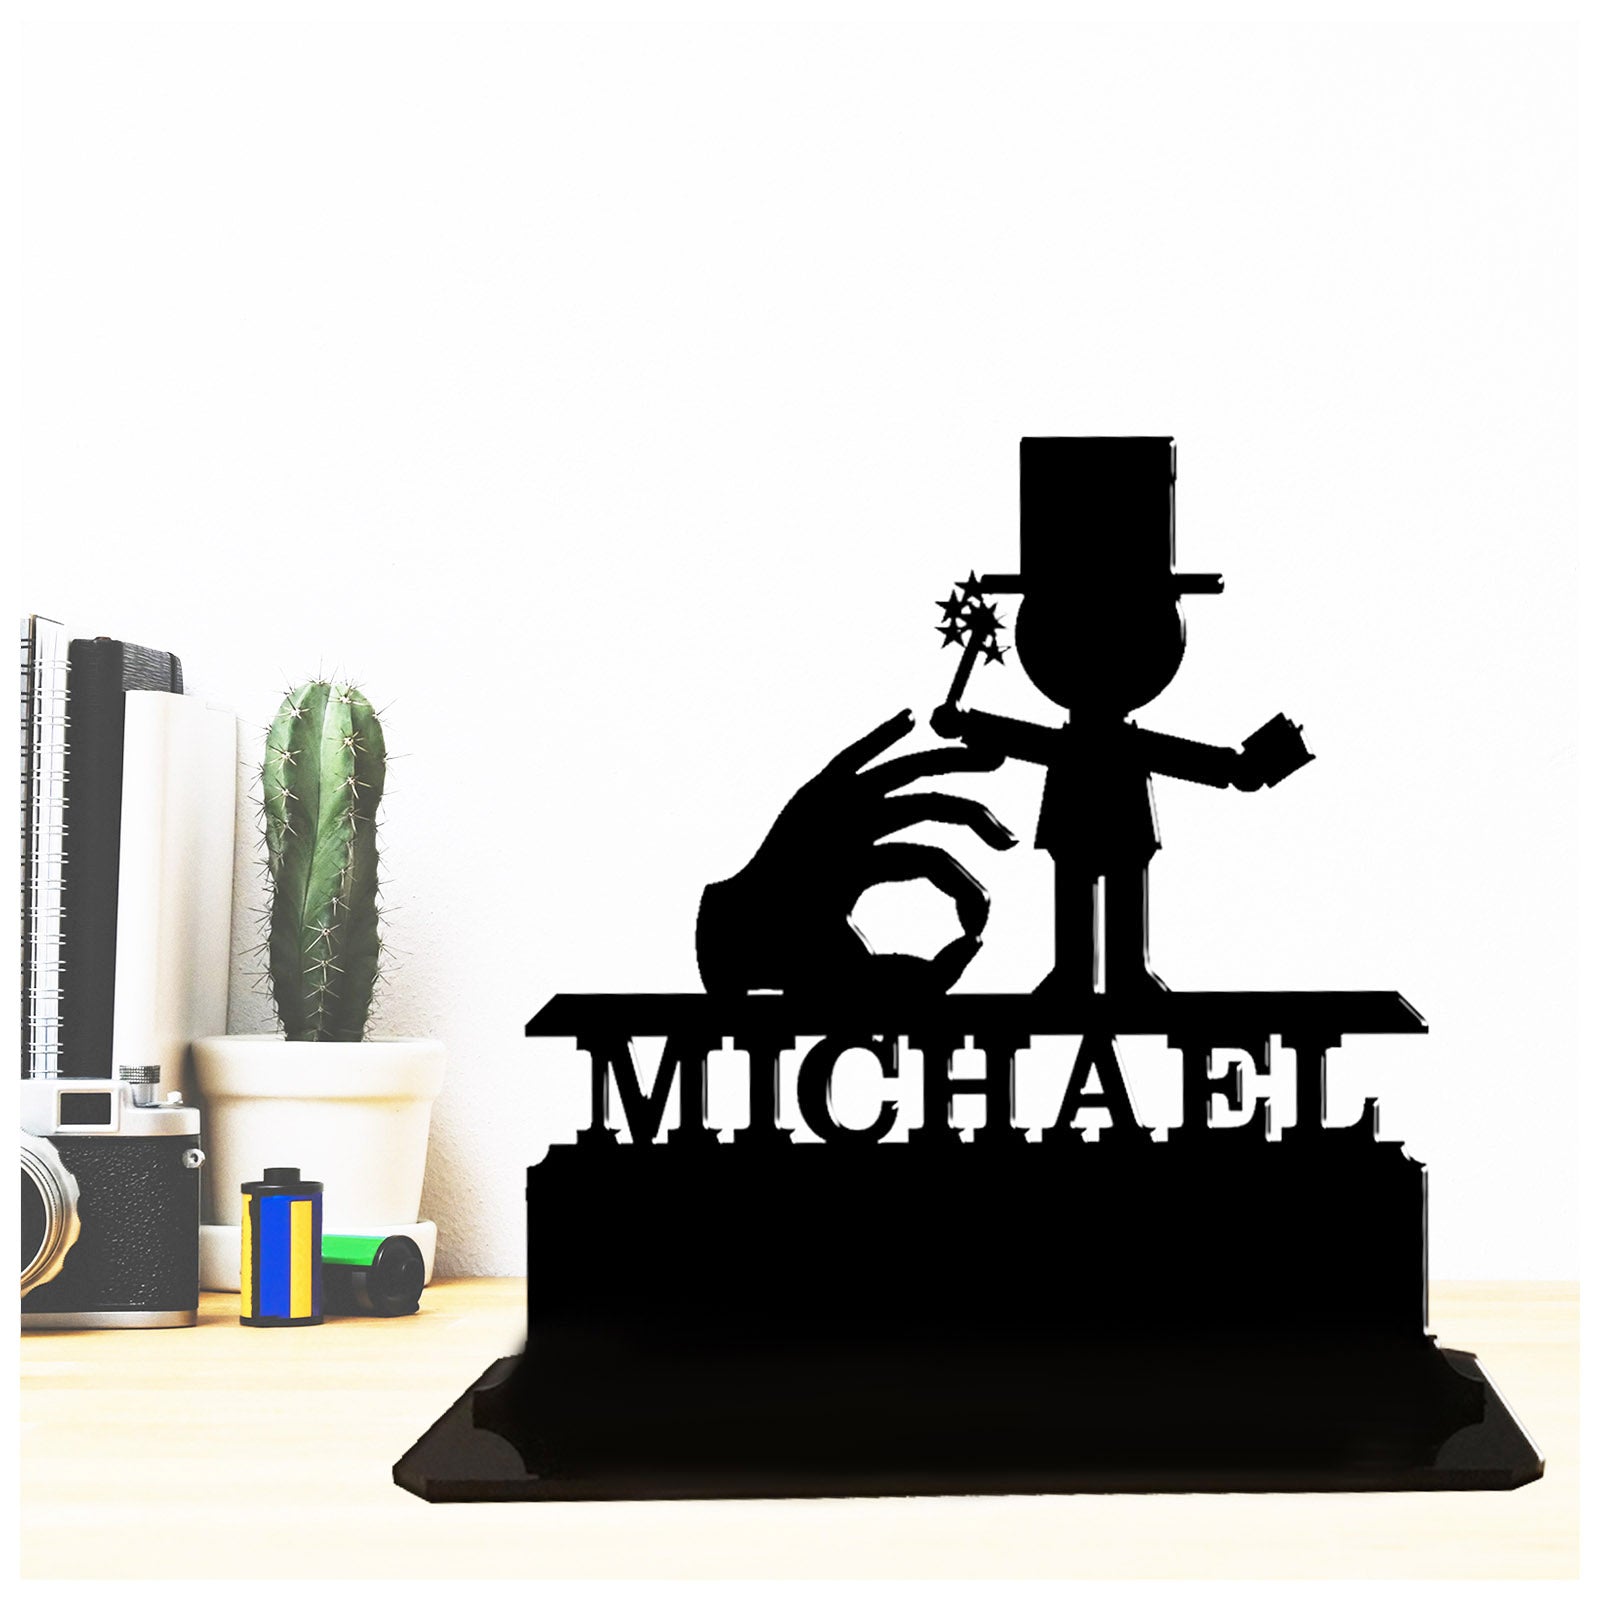 Acrylic personalized gift ideas for magicians. Standalone keepsake ornaments.